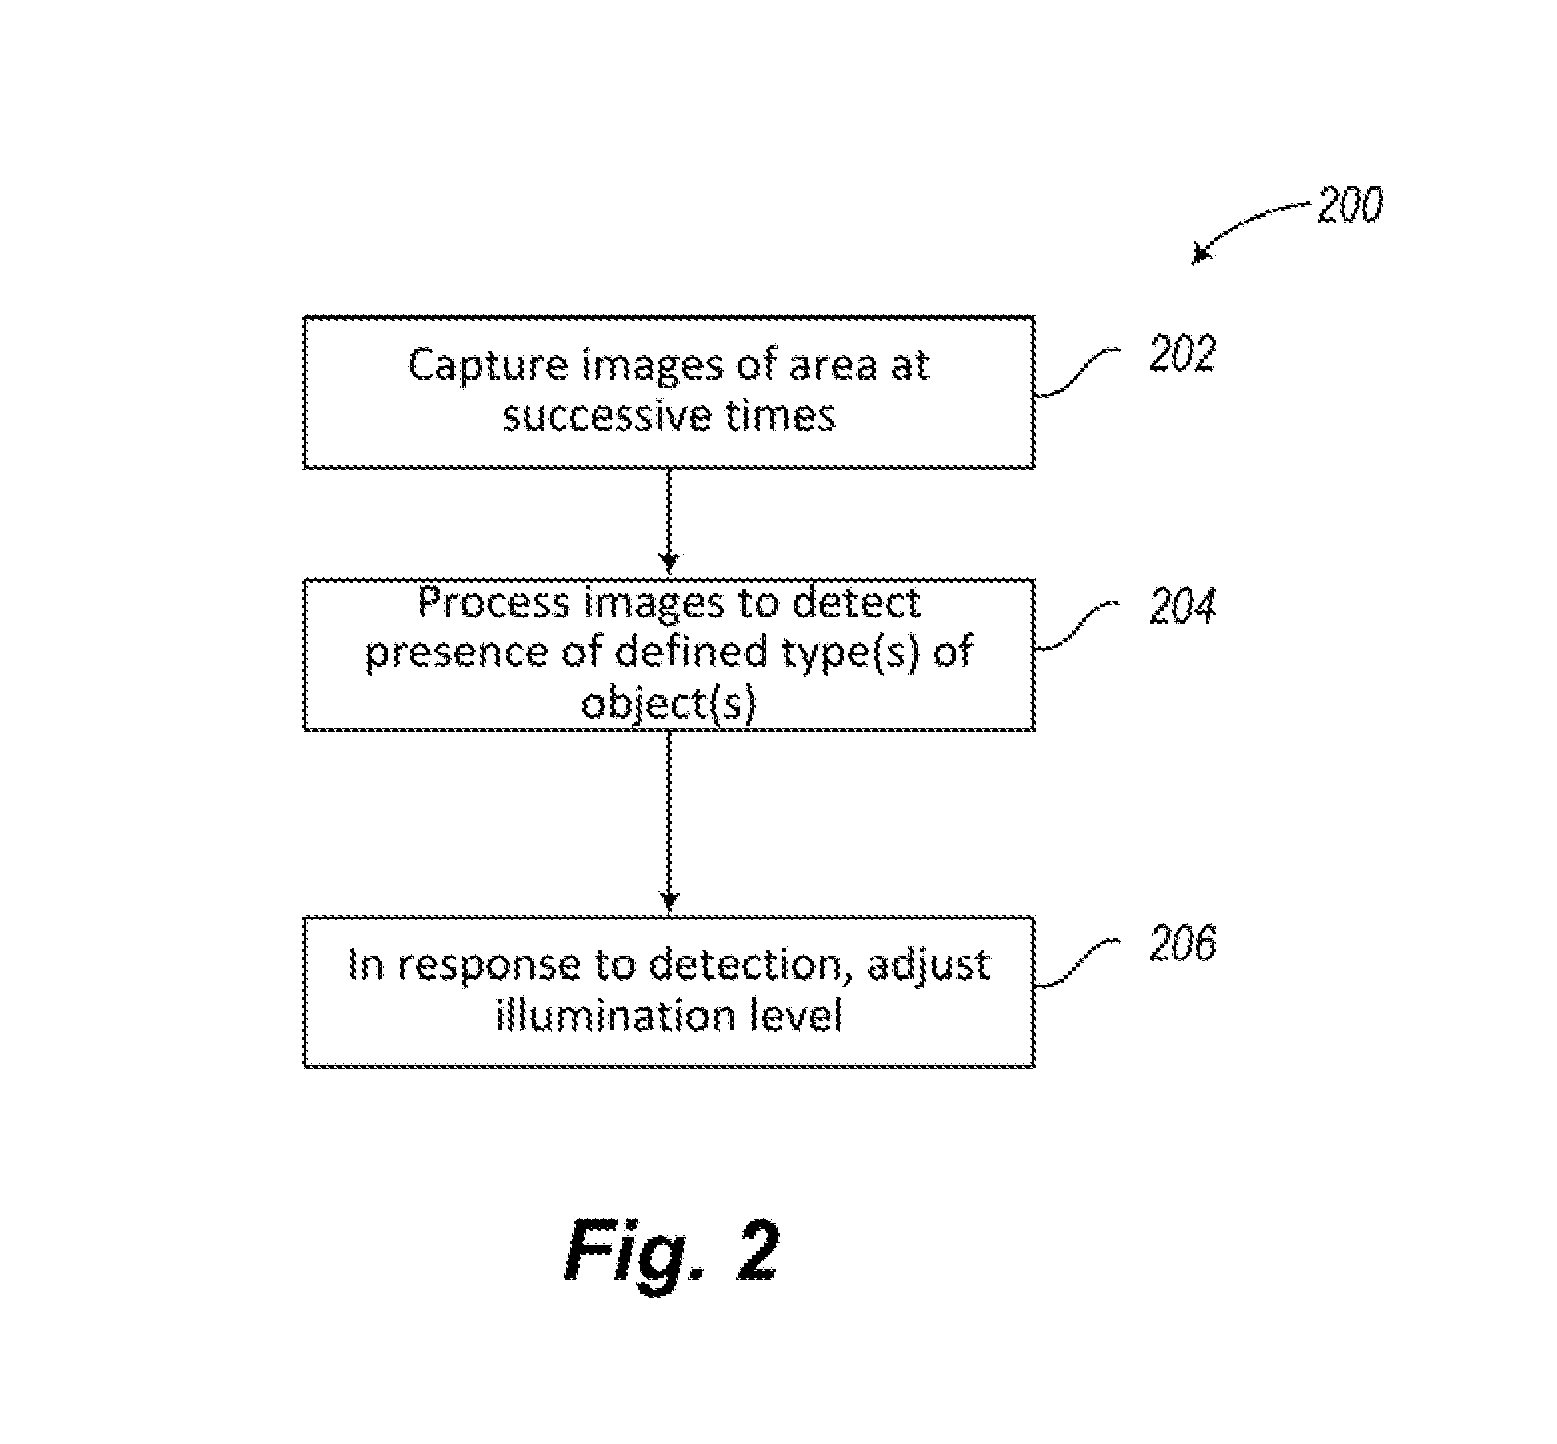 Systems and methods that employ object recognition